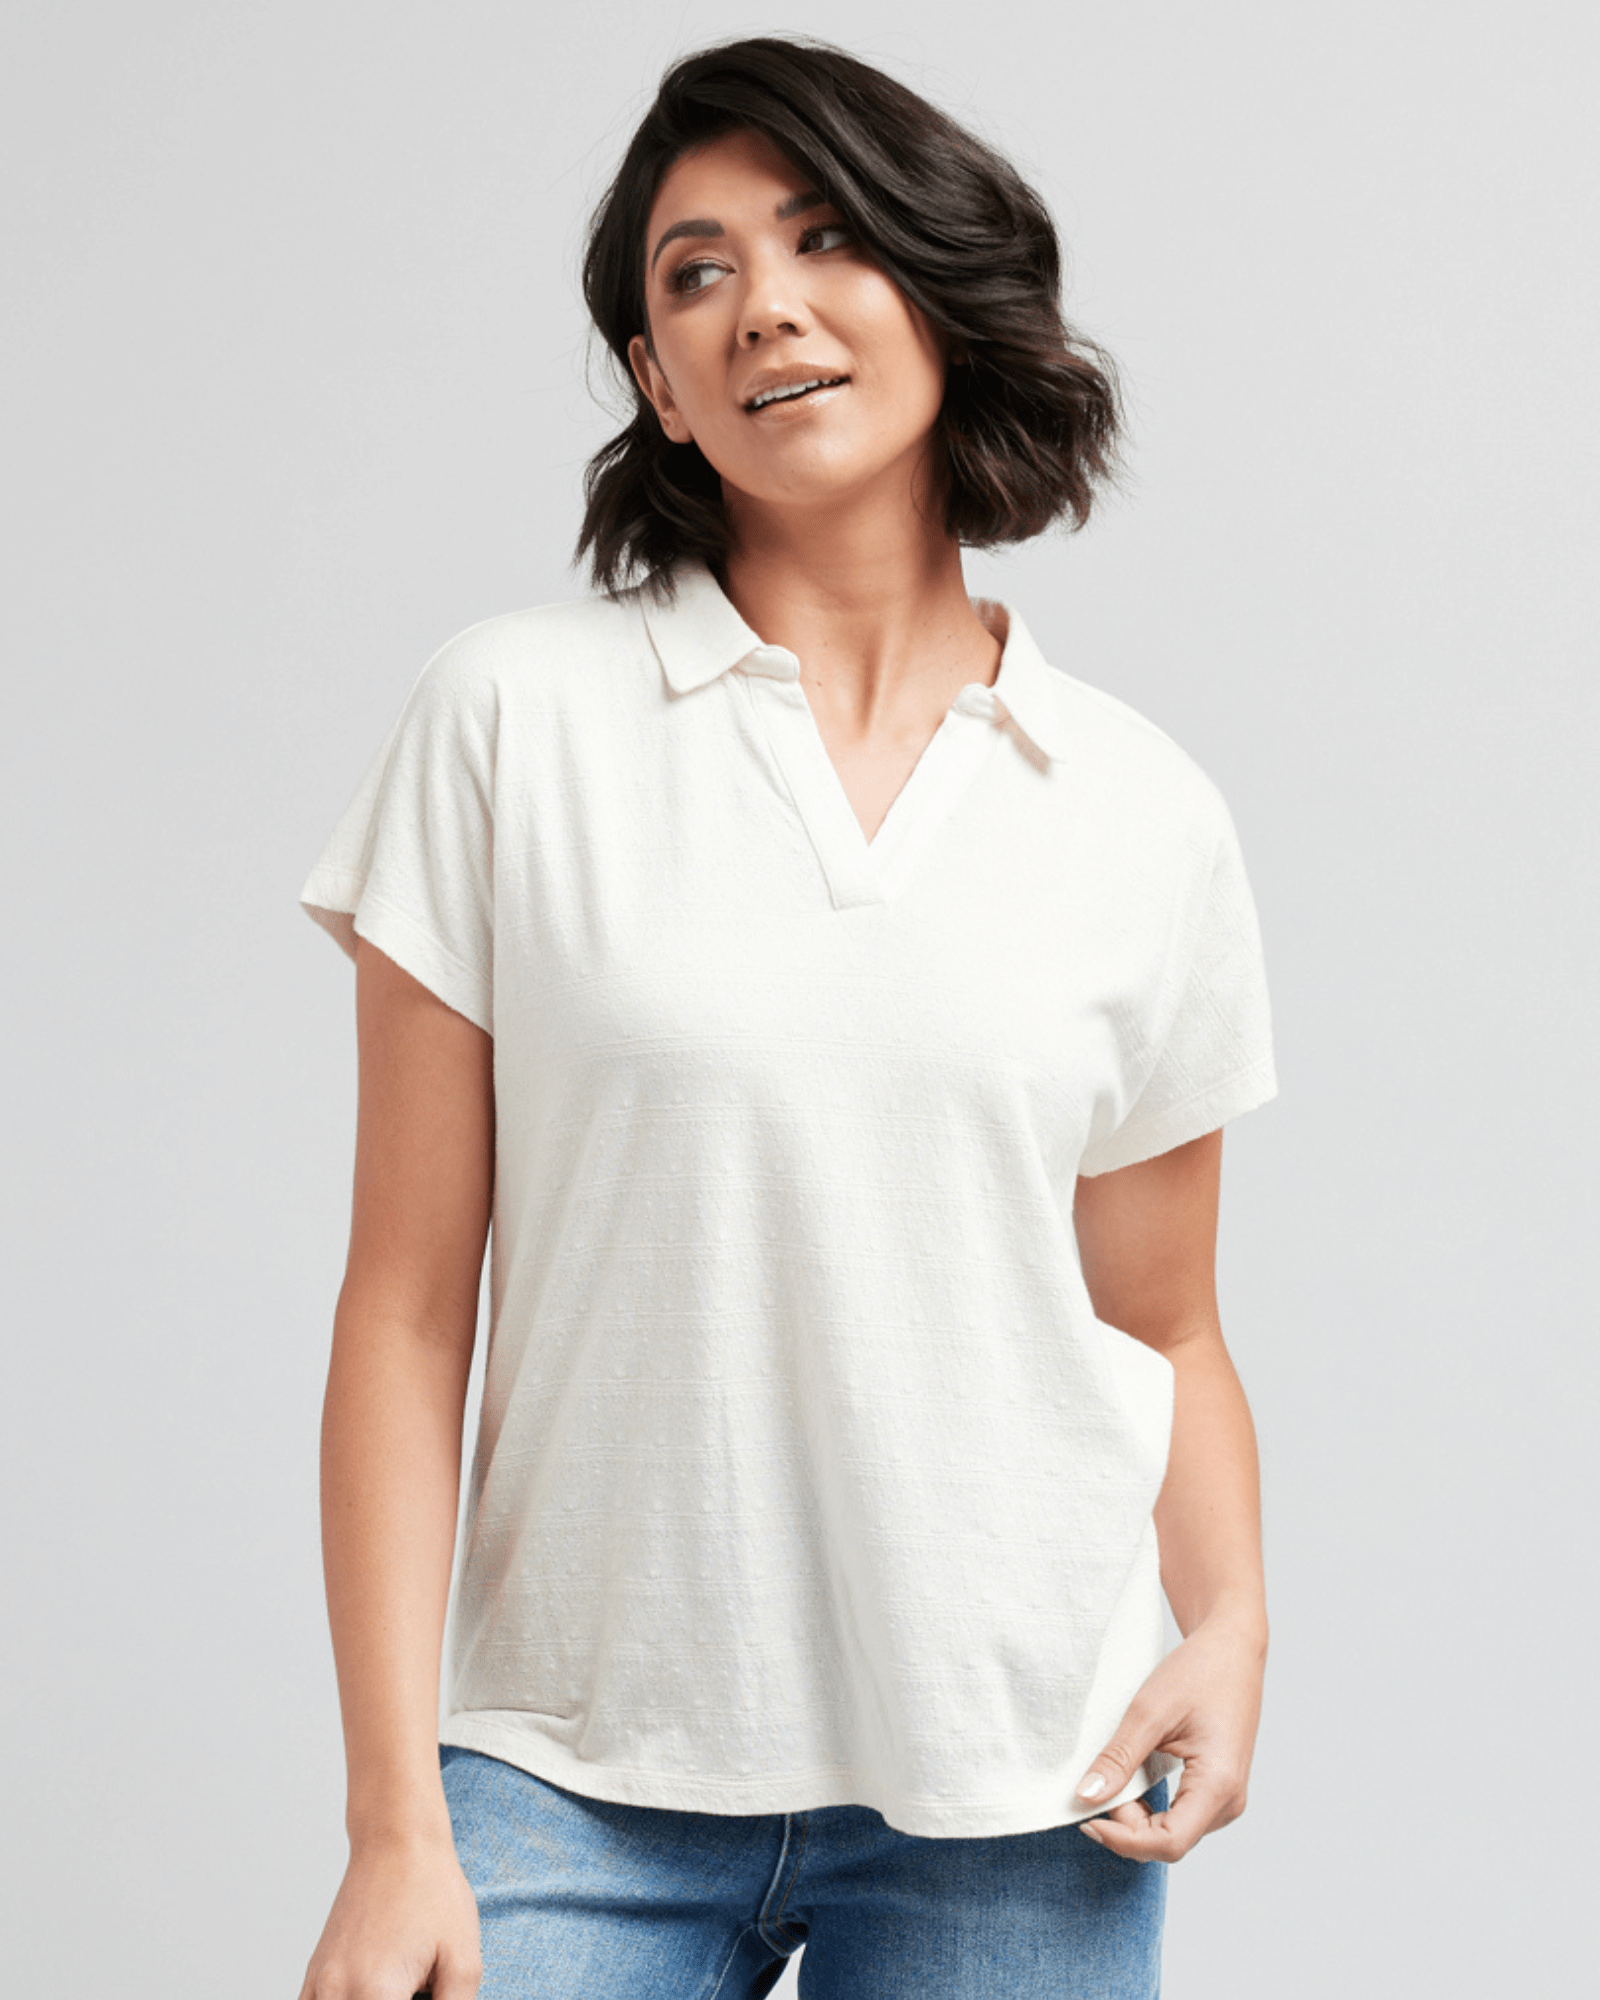 Woman in a short sleeve, collared, white blouse